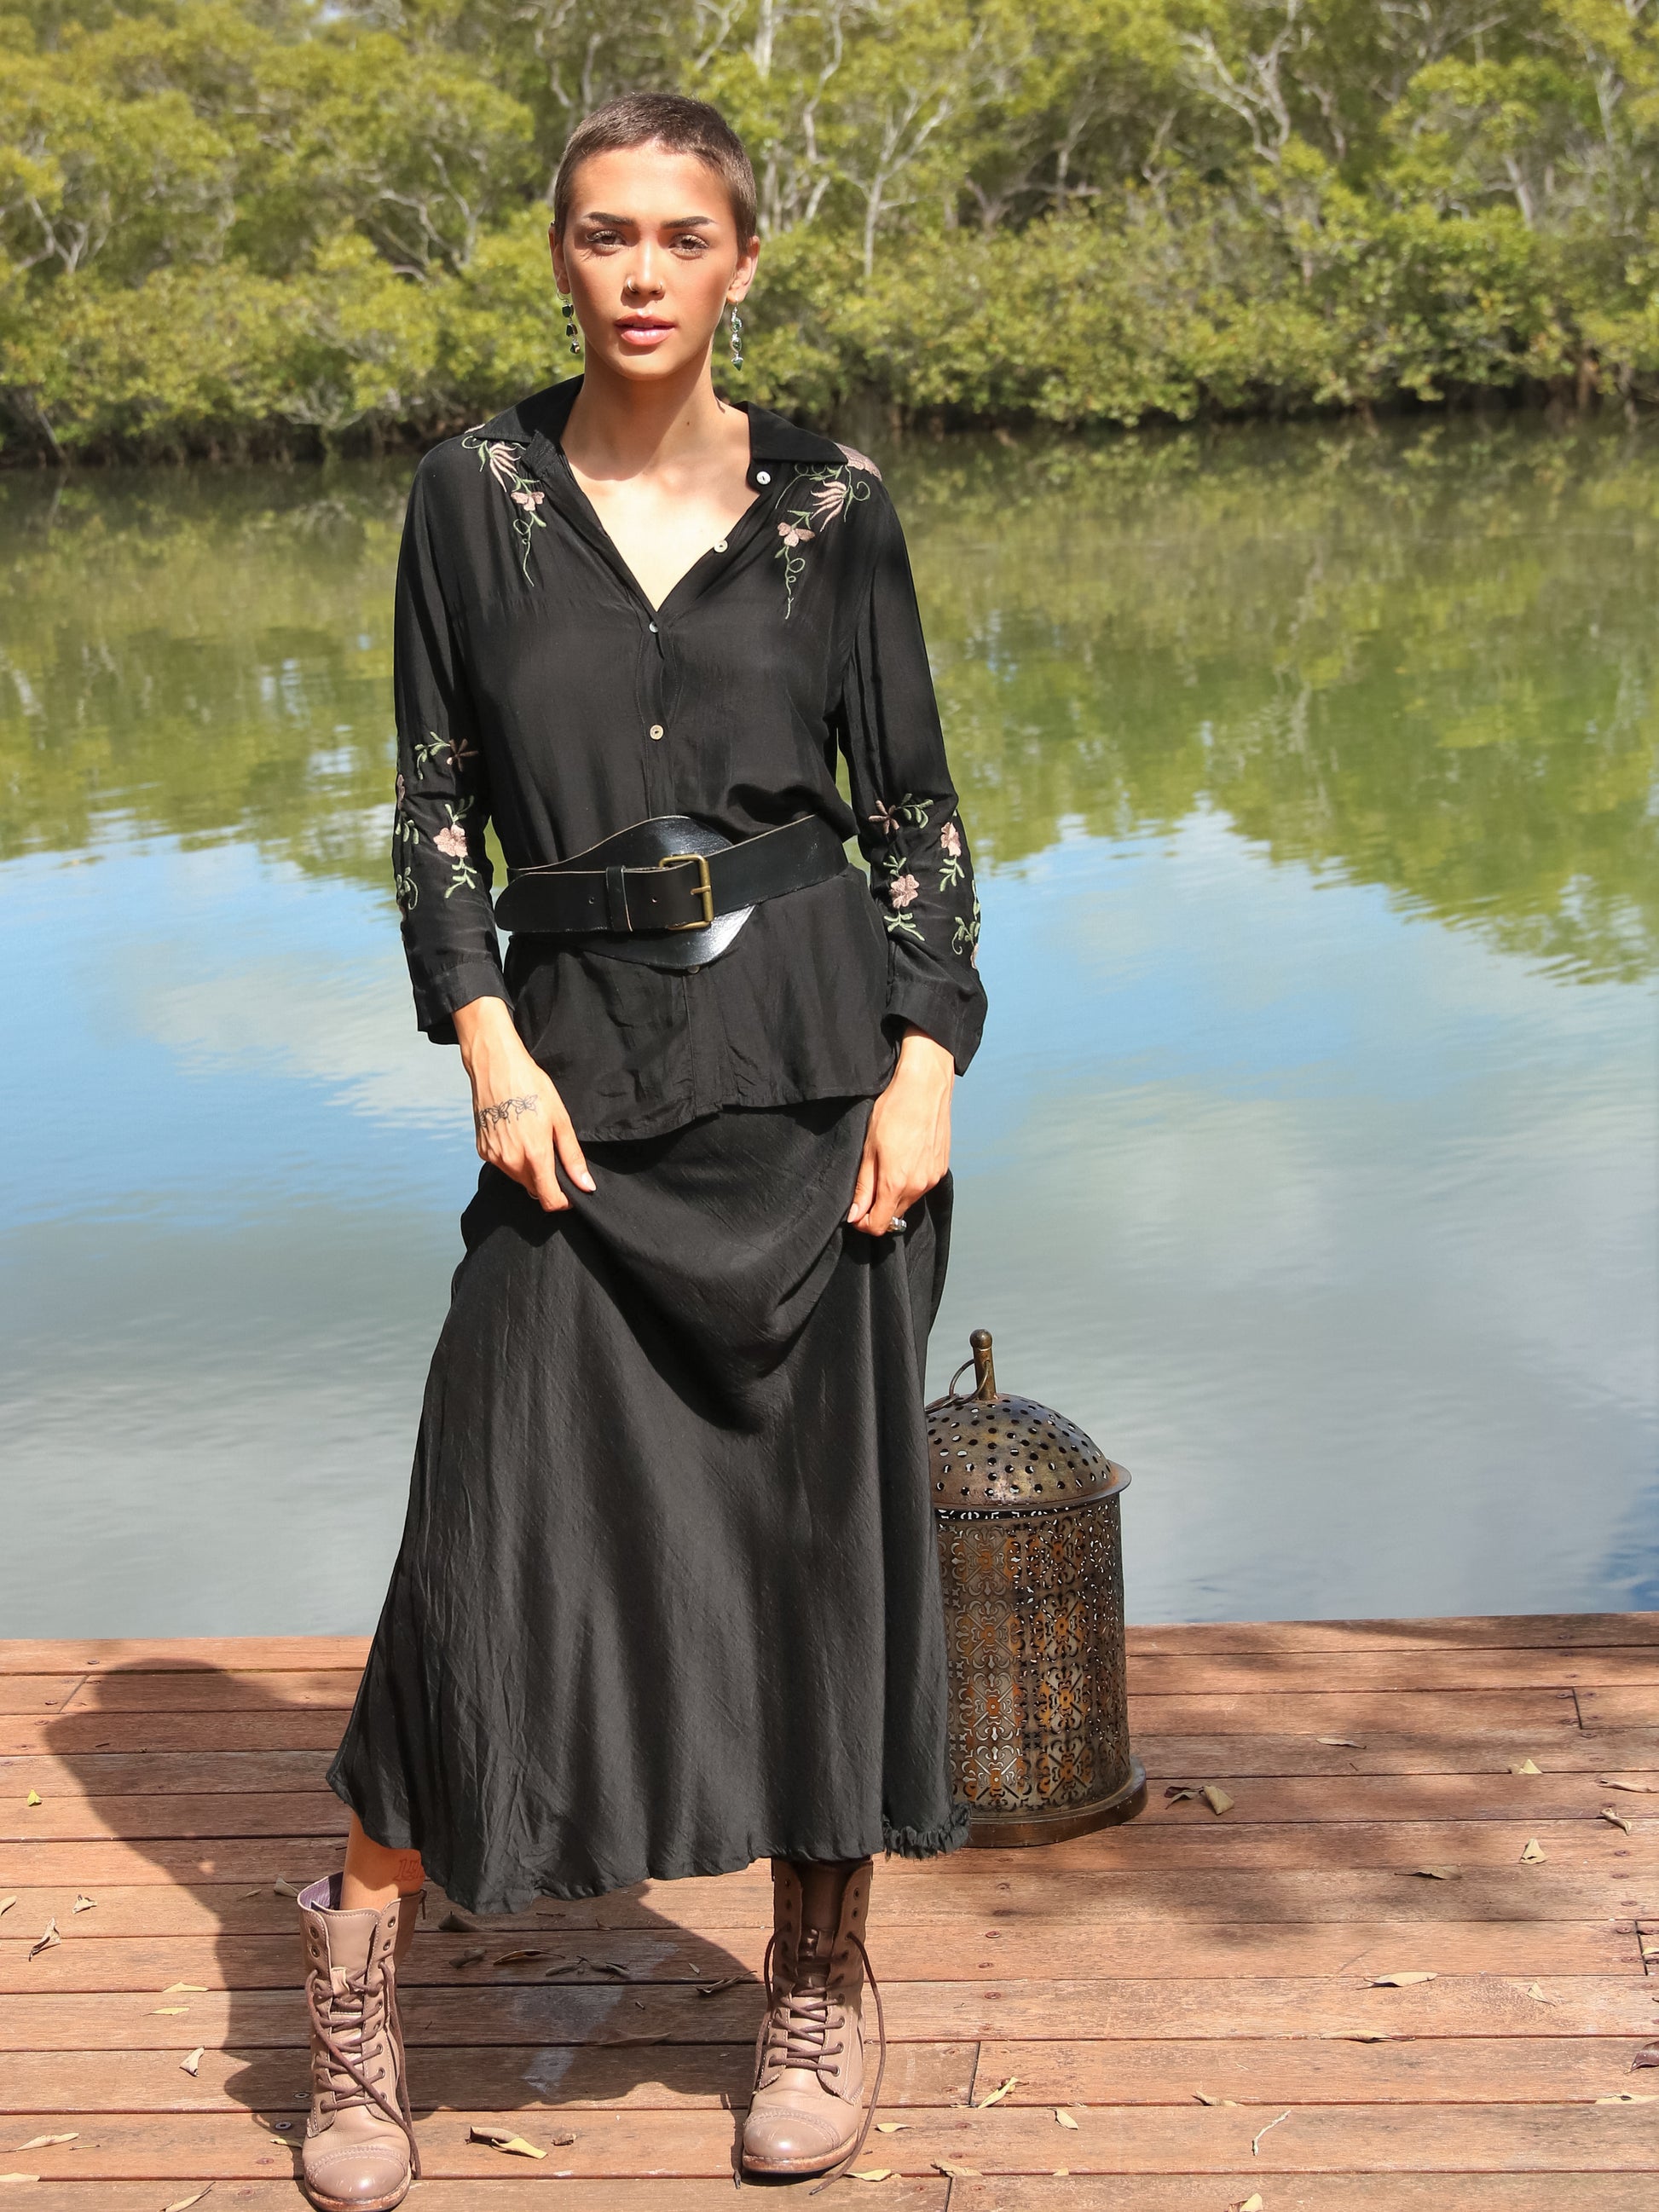 Lady in black silk skirt and shirt